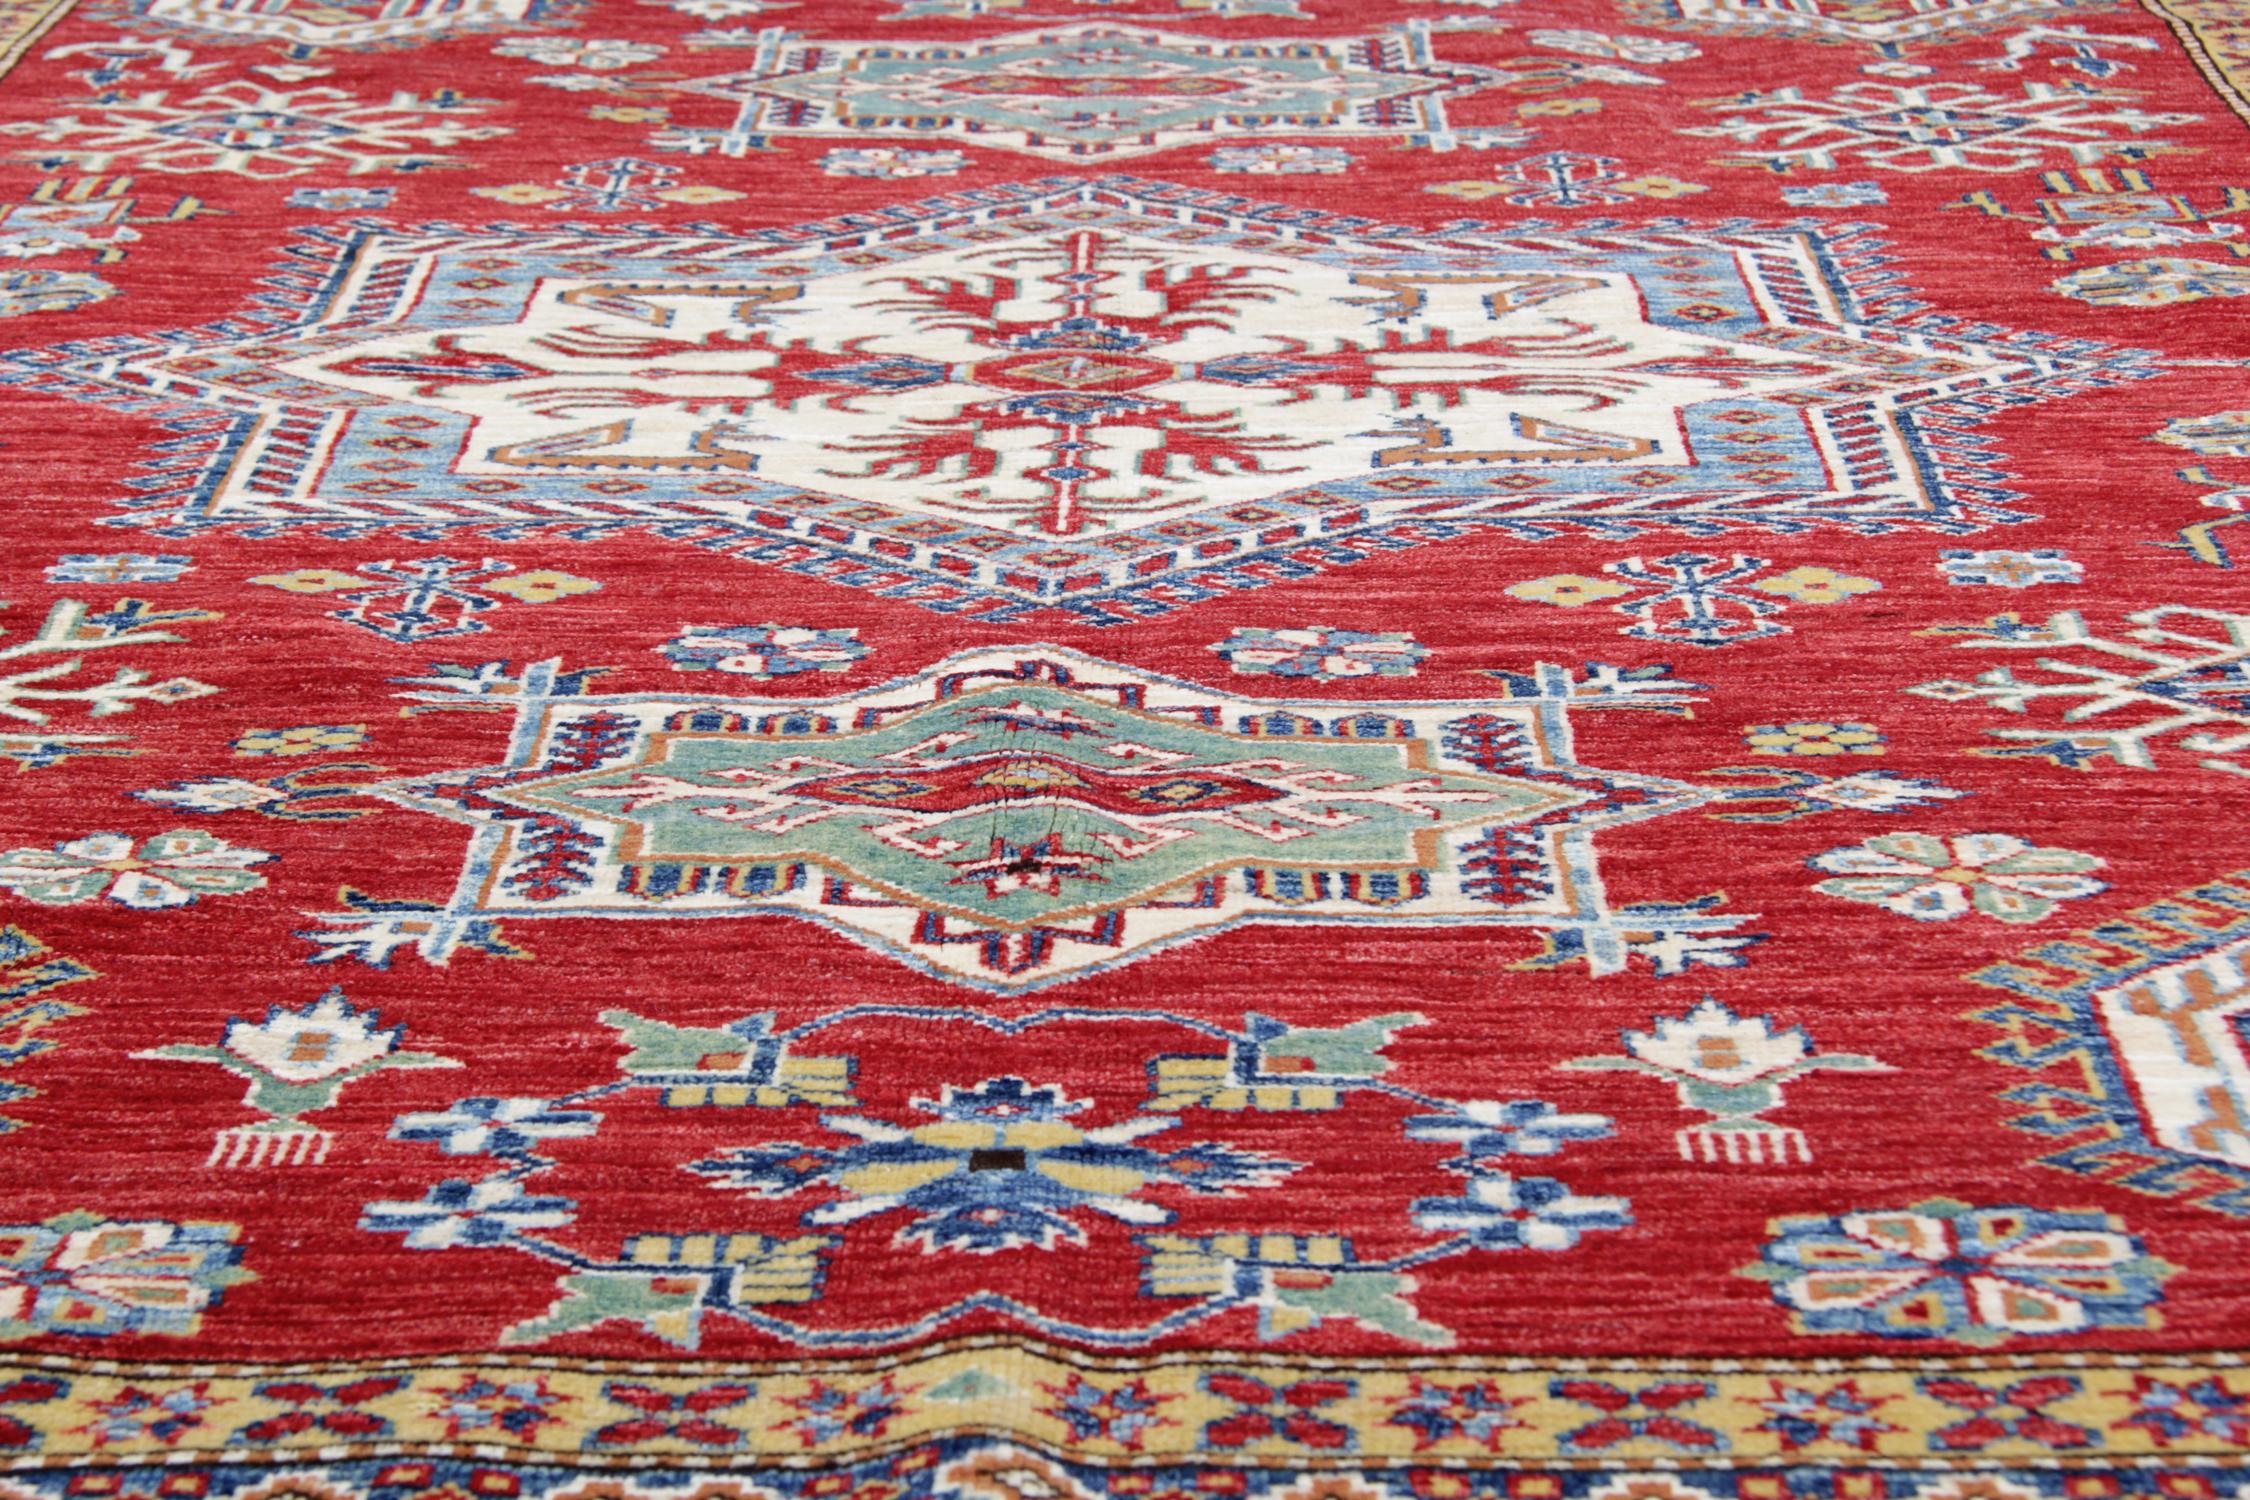 Kazak Rugs, Geometric Carpet Red Rustic Rug Livingroom In Excellent Condition For Sale In Hampshire, GB